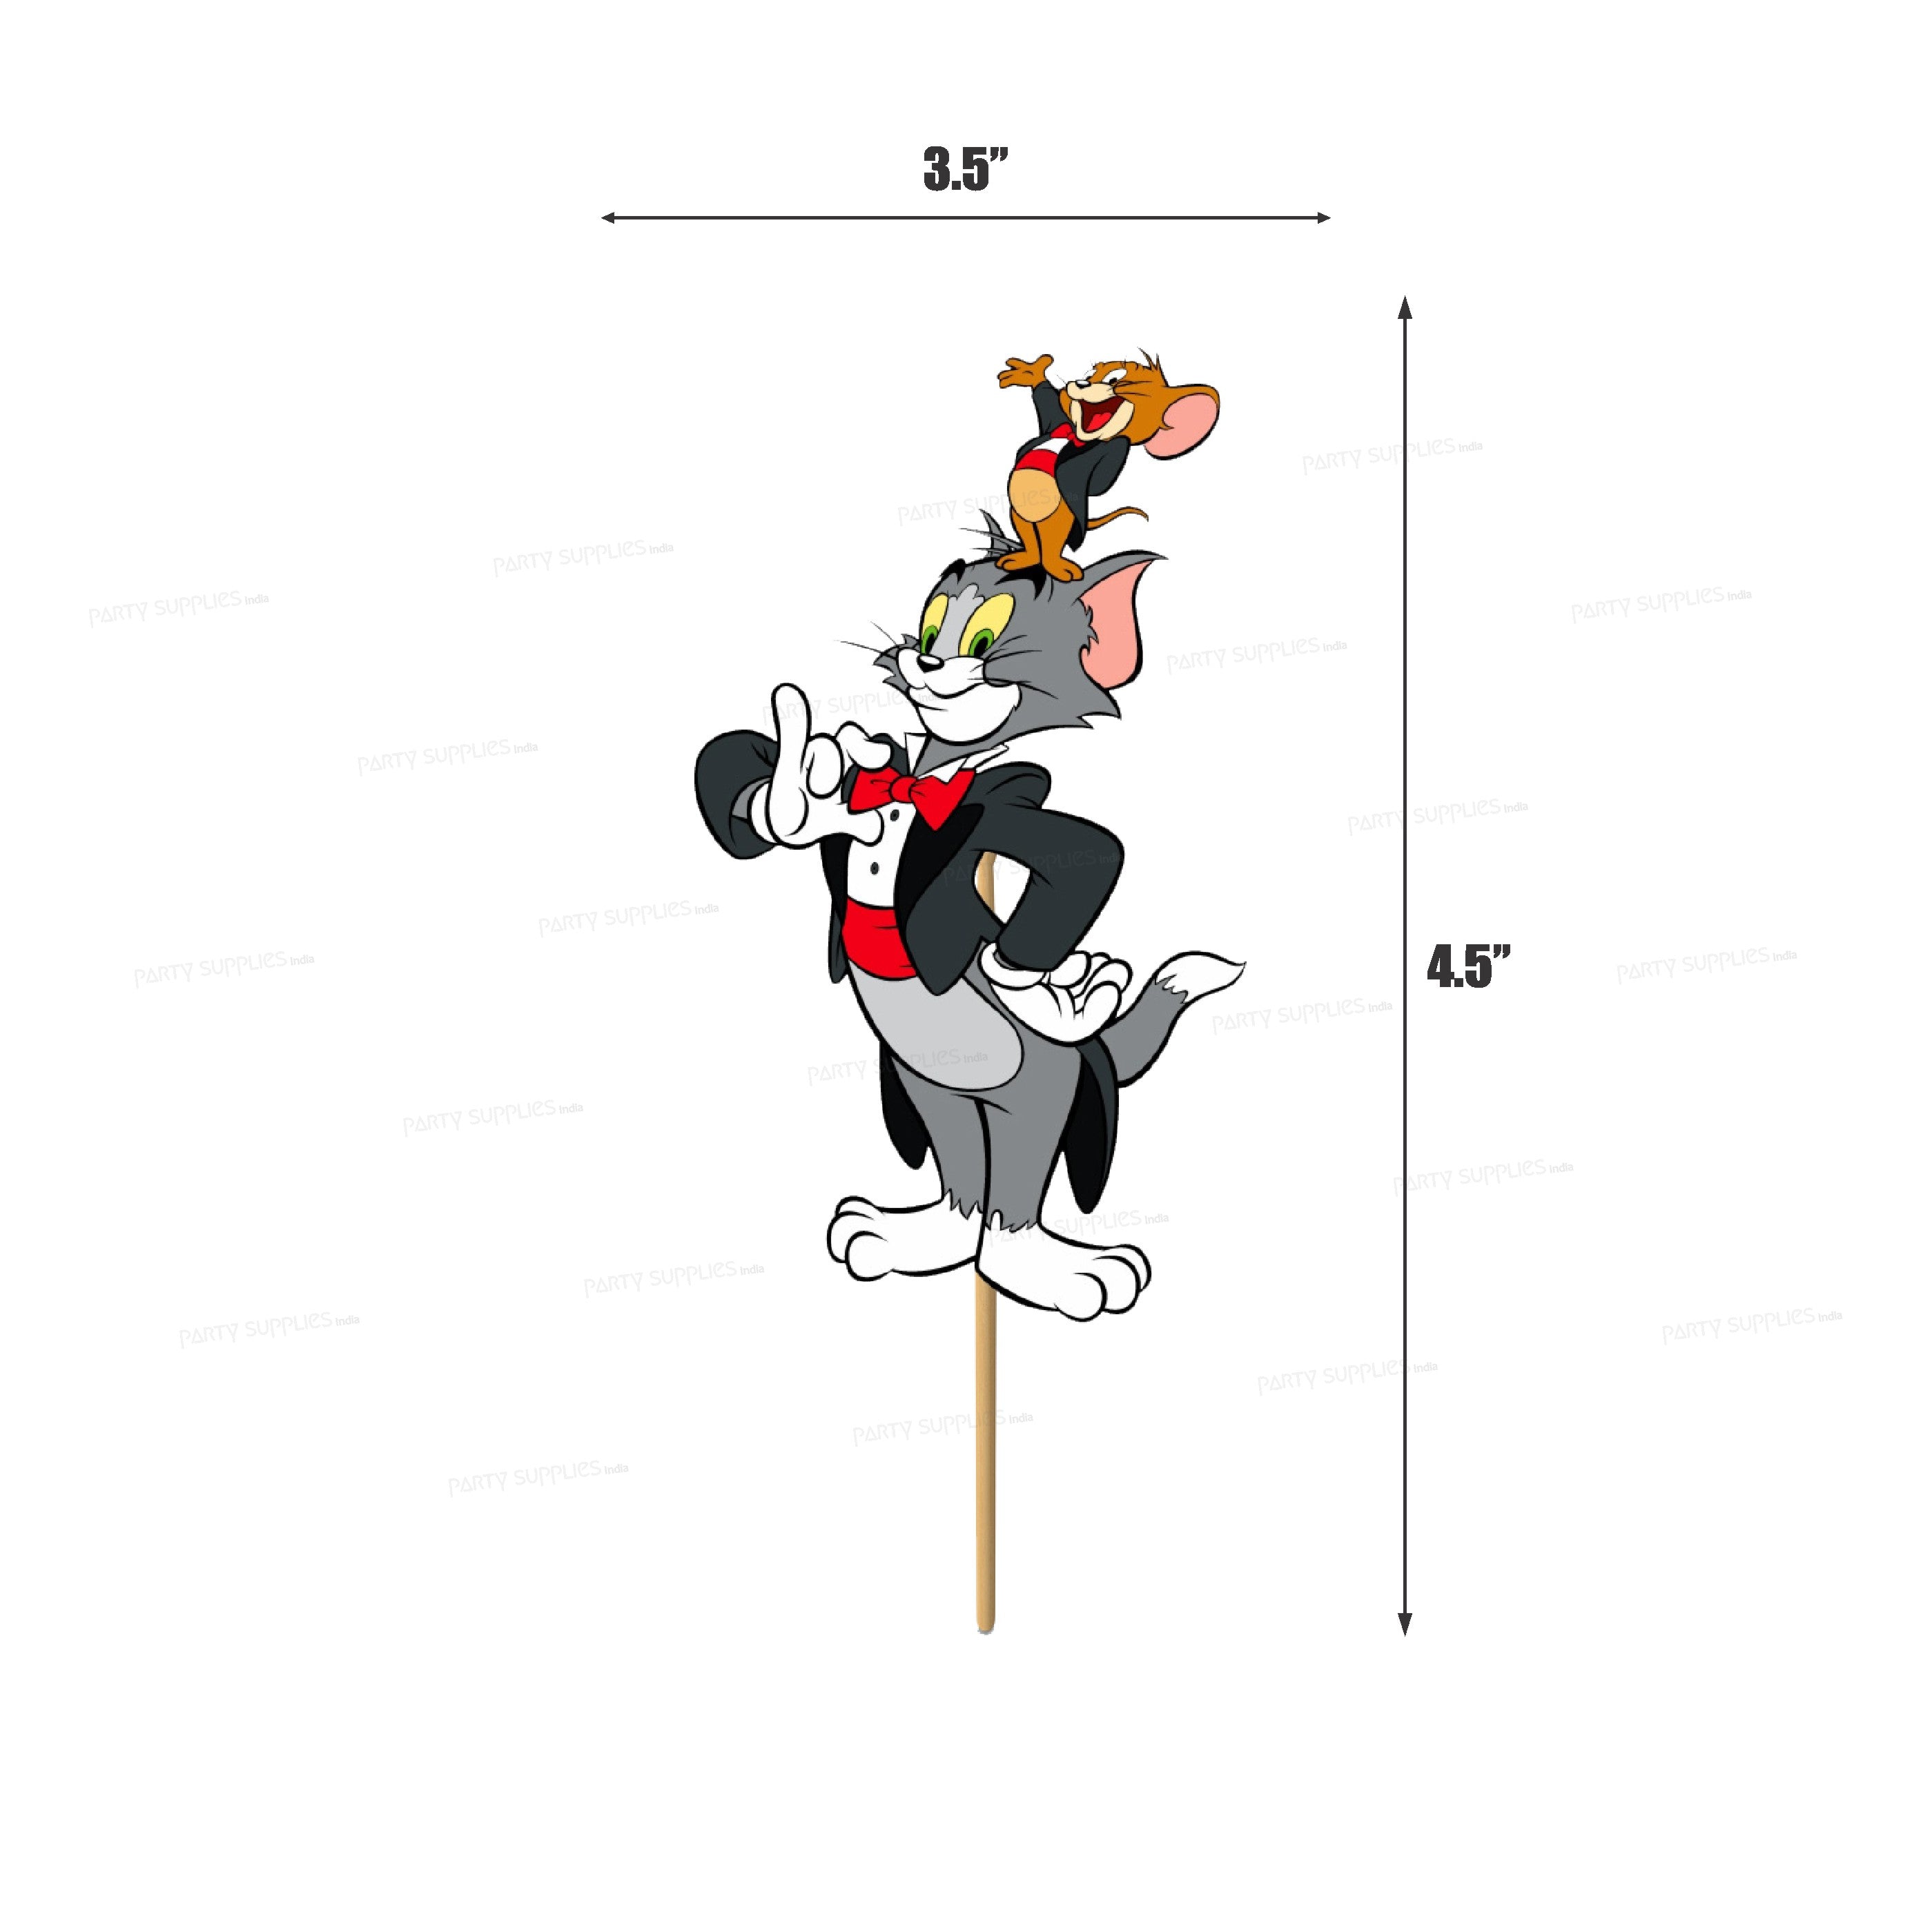 PSI Tom &amp; Jerry Theme Cup Cake Topper